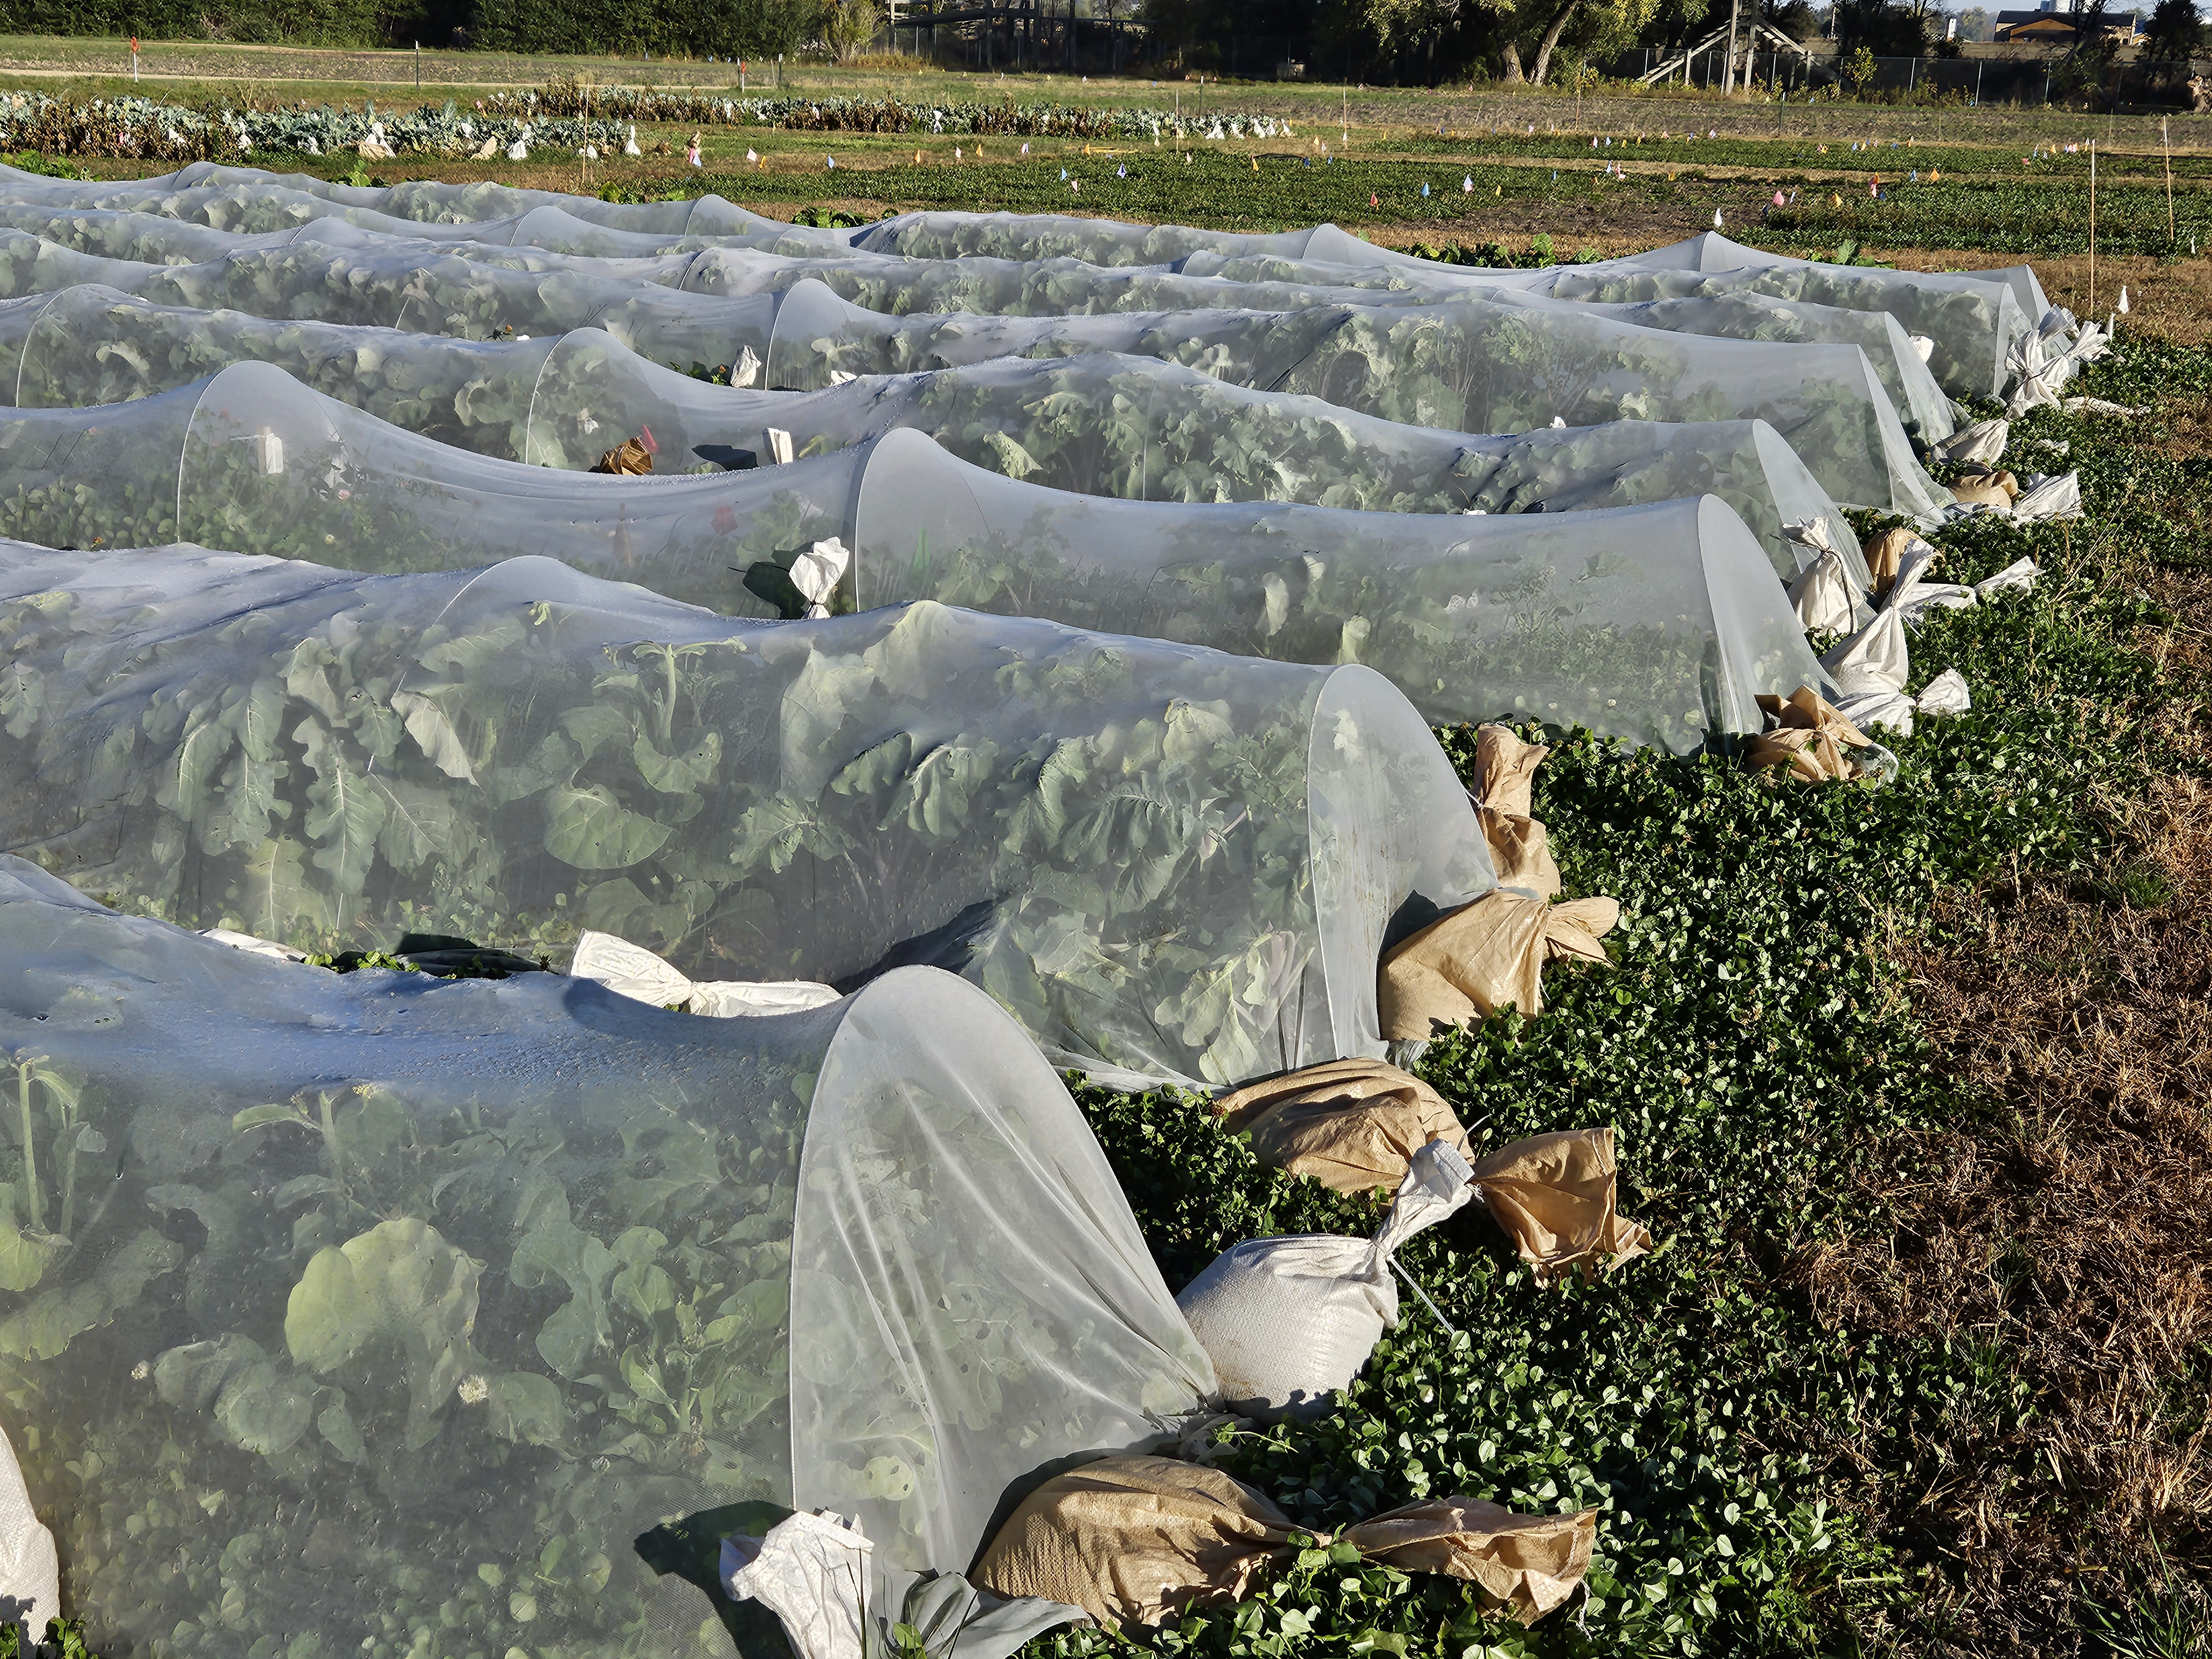 Rows of vegetables are shown with netting protection over them